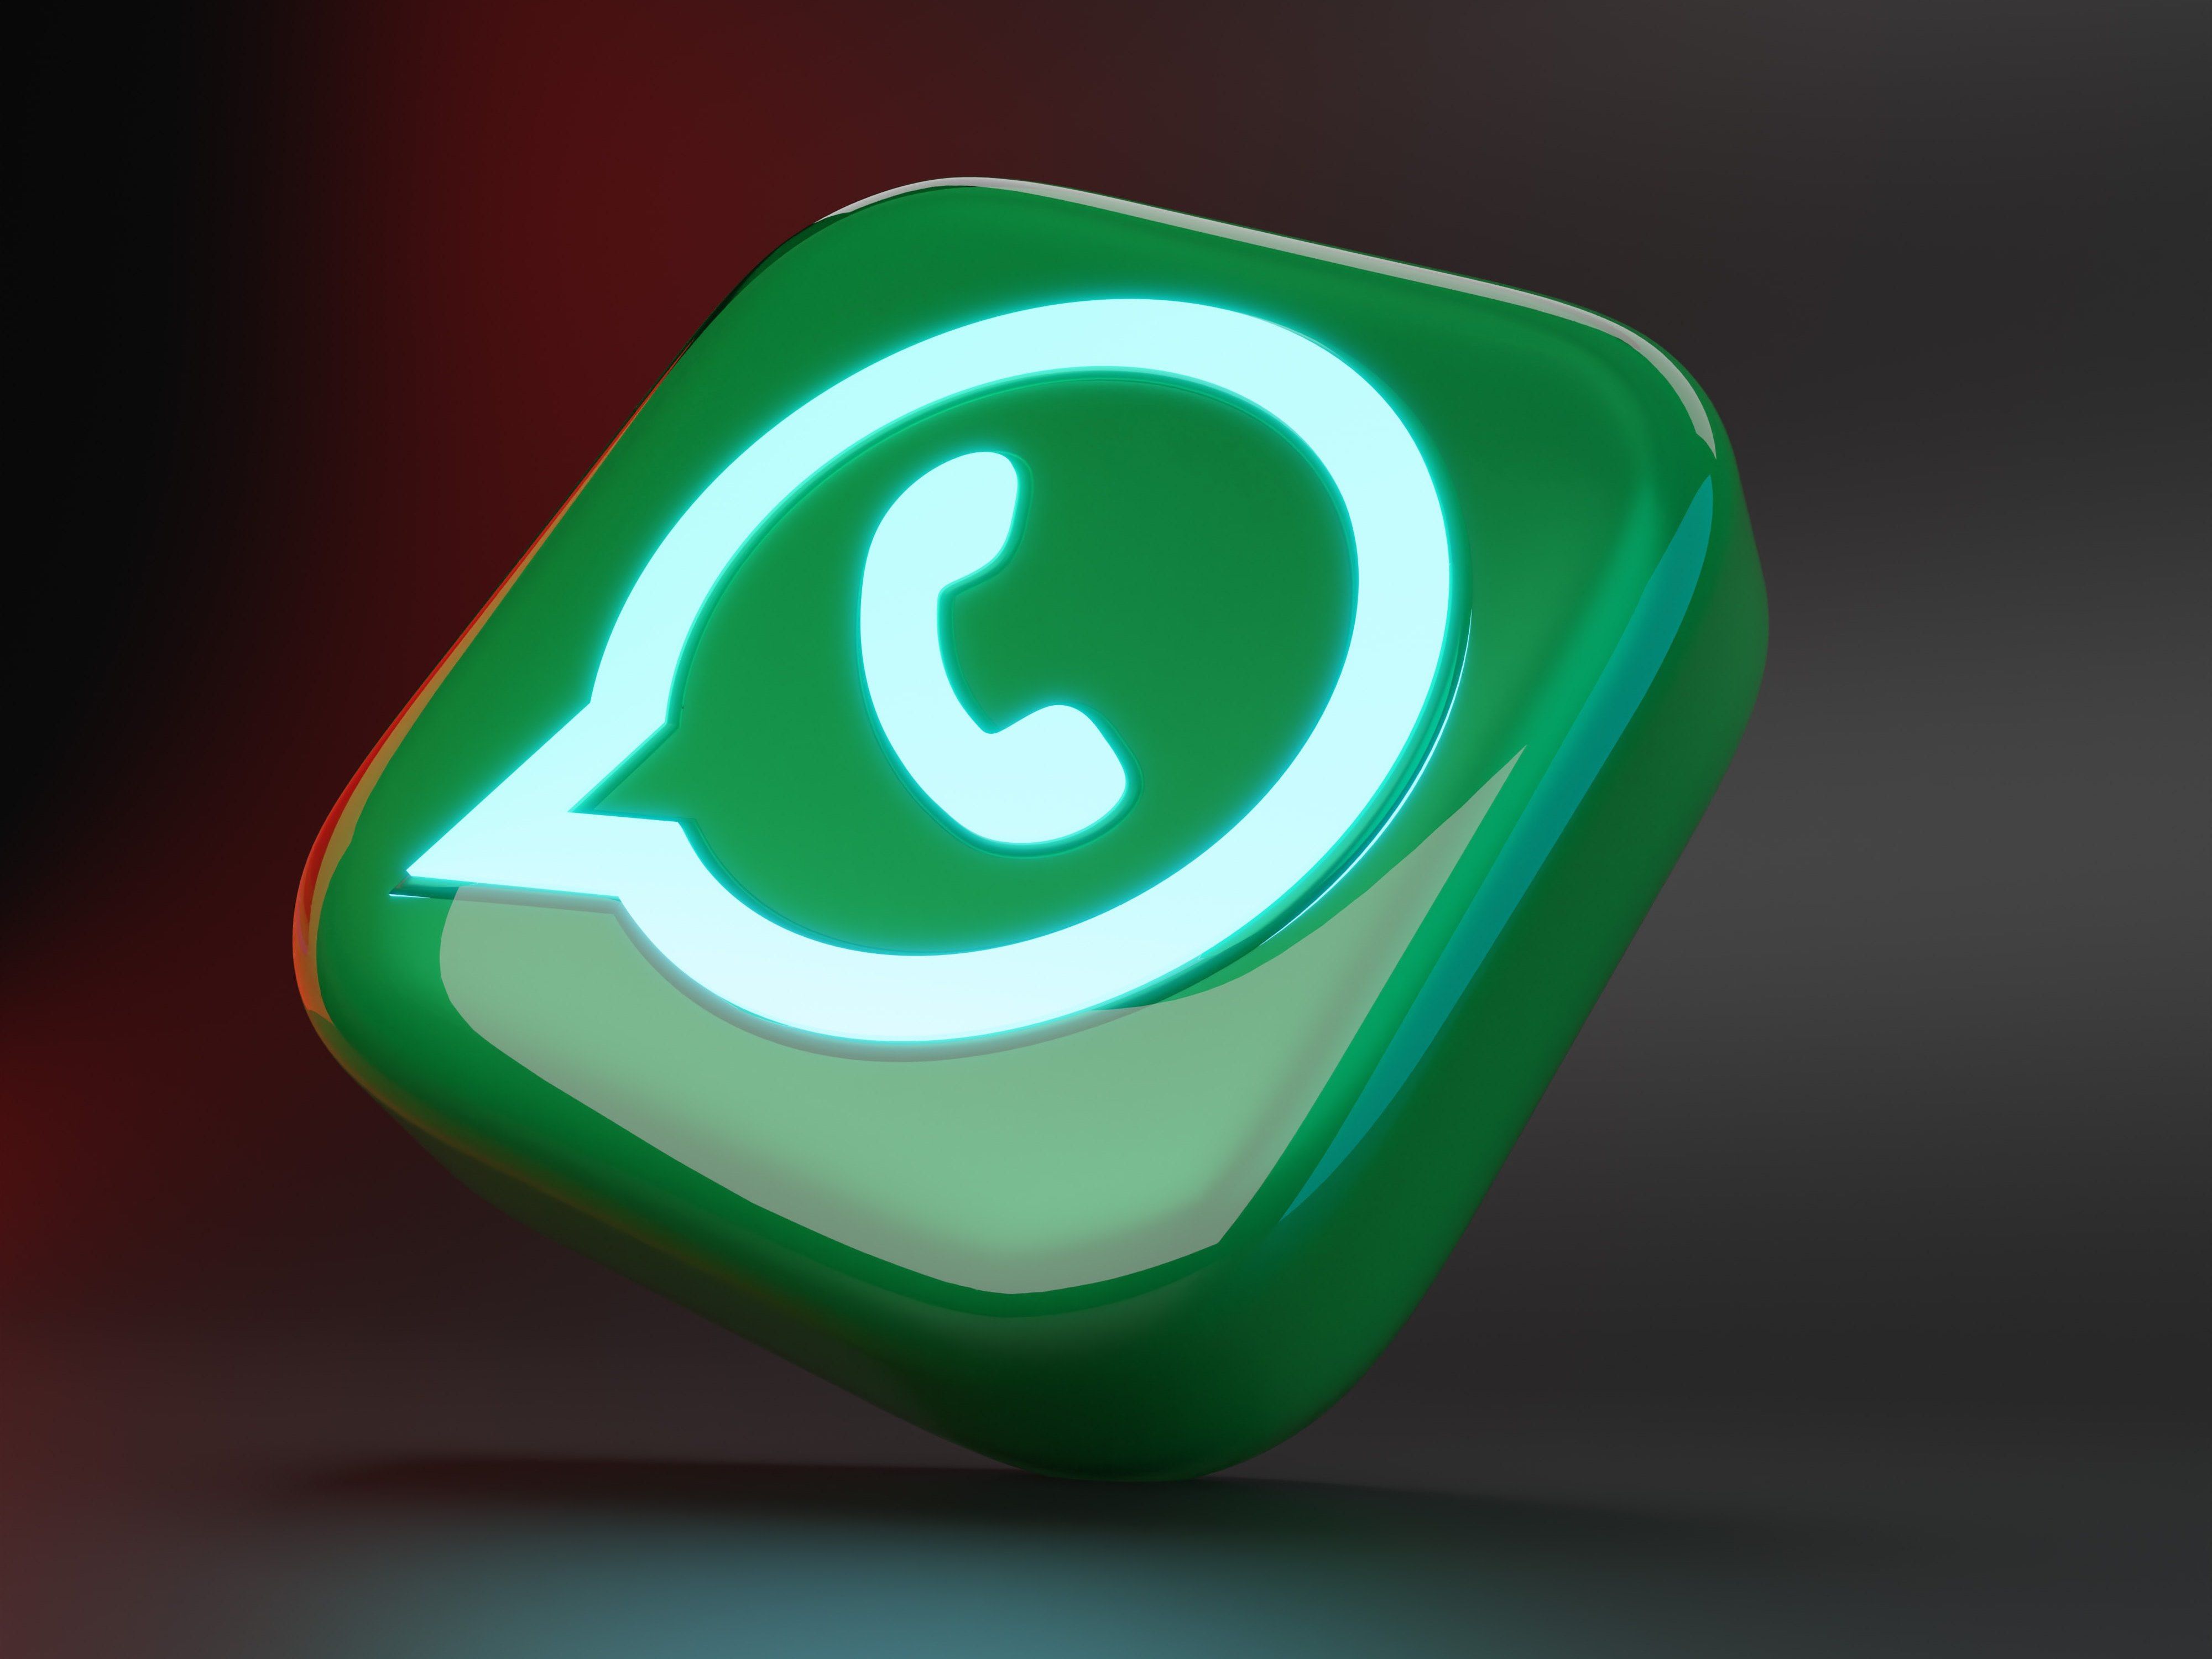 WhatsApp Communities are finally rolling out to beta users, ready to supercharge group chats